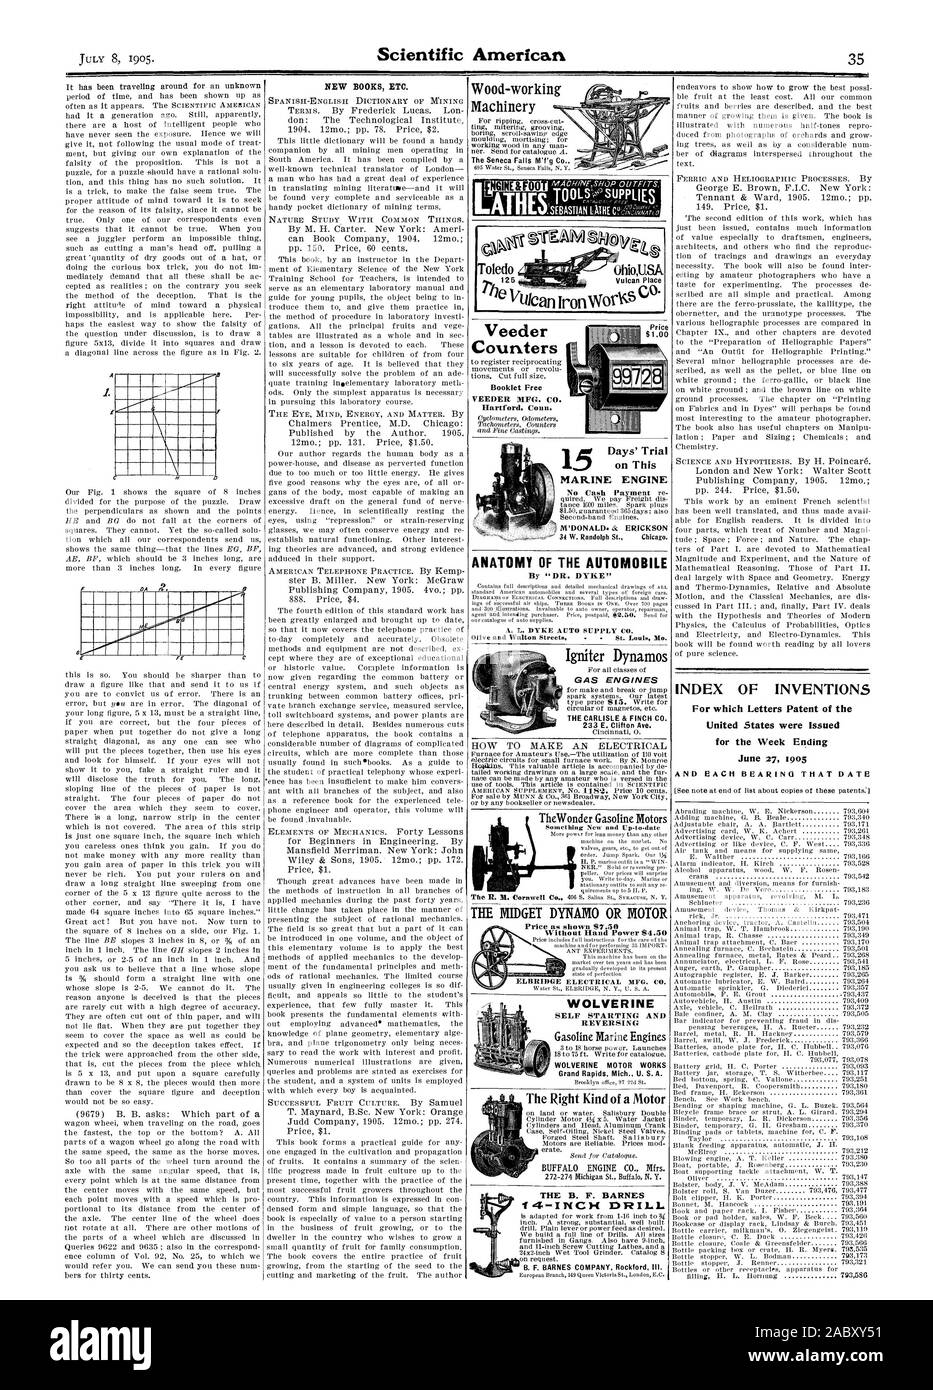 125 Vulcan Place The v By 'DR. DYKE' Price as shown S7.50 Without Hand Power 84.50 WOLVERINE SELF STARTING AND REVERSING WOLVERINE MOTOR WORKS Grand Rapids Mich. U. S. A. The Right Kind of a Motor THE B. F. BARNES INDEX OF INVENTIONS United States were Issued for the Week Ending June 27 1905 AND EACH BEARING THAT DATE Counters Booklet Free VEEDER MFG. CO. Hartford Conn. 15 Days' Trial on This MARINE ENGINE GAS ENGINES THE CARLISLE & FINCH CO. 233 E. Clifton Ave., scientific american, 1905-07-08 Stock Photo